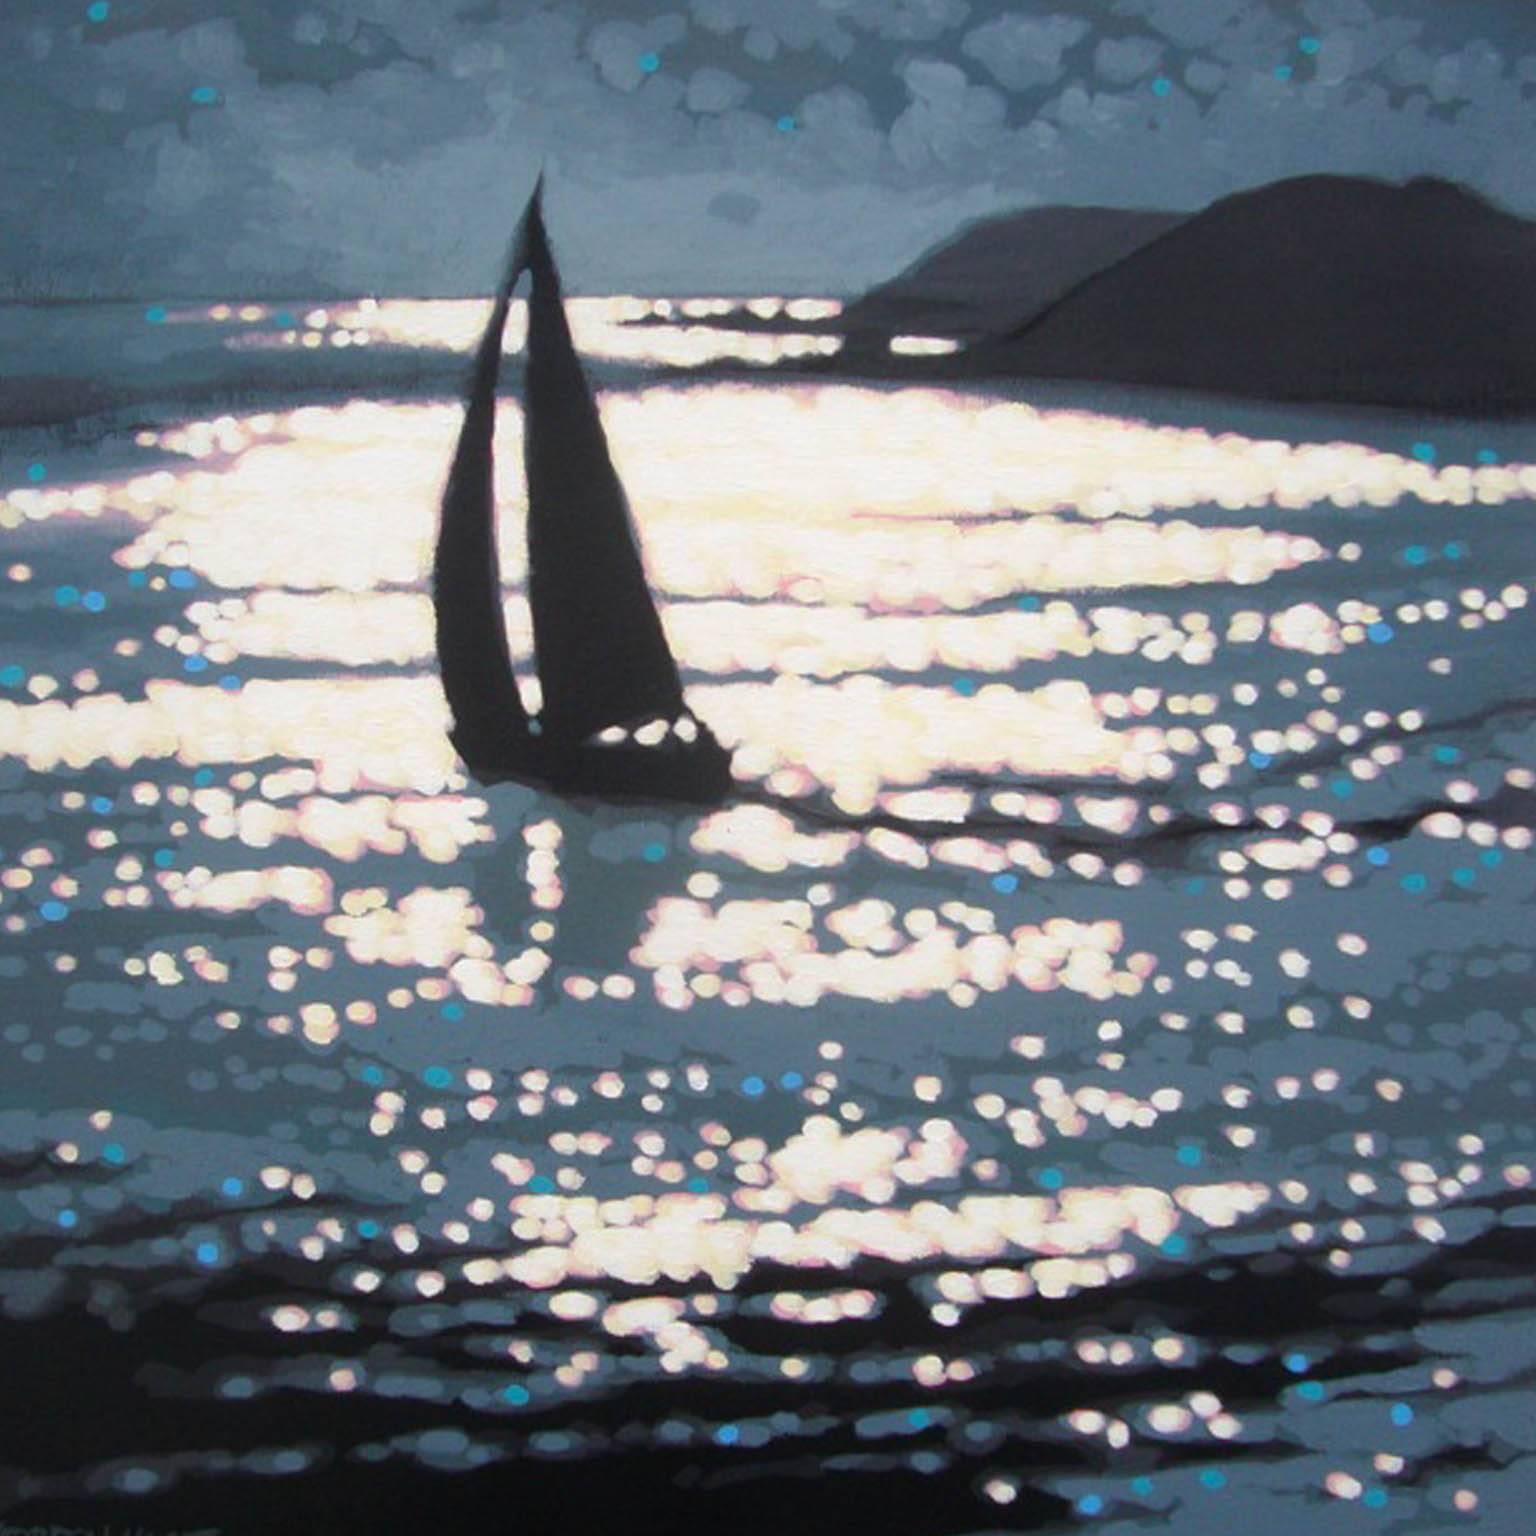 A Gordon Hunt original painting called 'Across the Estuary.' This seascape painting features a yacht sailing across the Helford Estuary in Cornwall. It’s a cloudy, windy day, but patches of sunshine sparkle on the water. Gordon Hunt paints